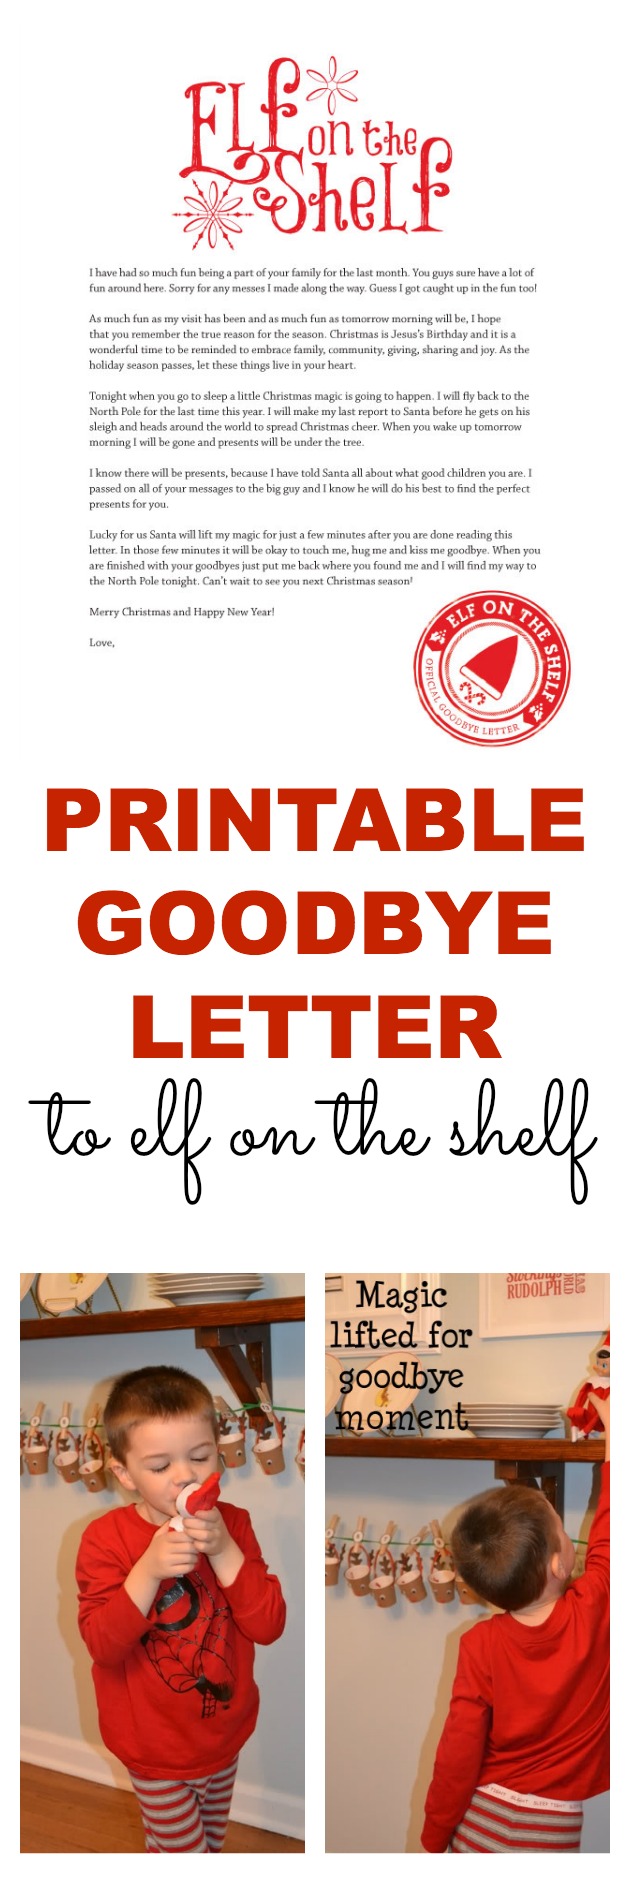 A printable goodbye letter for Elf on the Shelf. Perfect way to wrap up all the fun--even has a reminder about the reason for the season. A MUST HAVE if you do Elf on the Shelf.